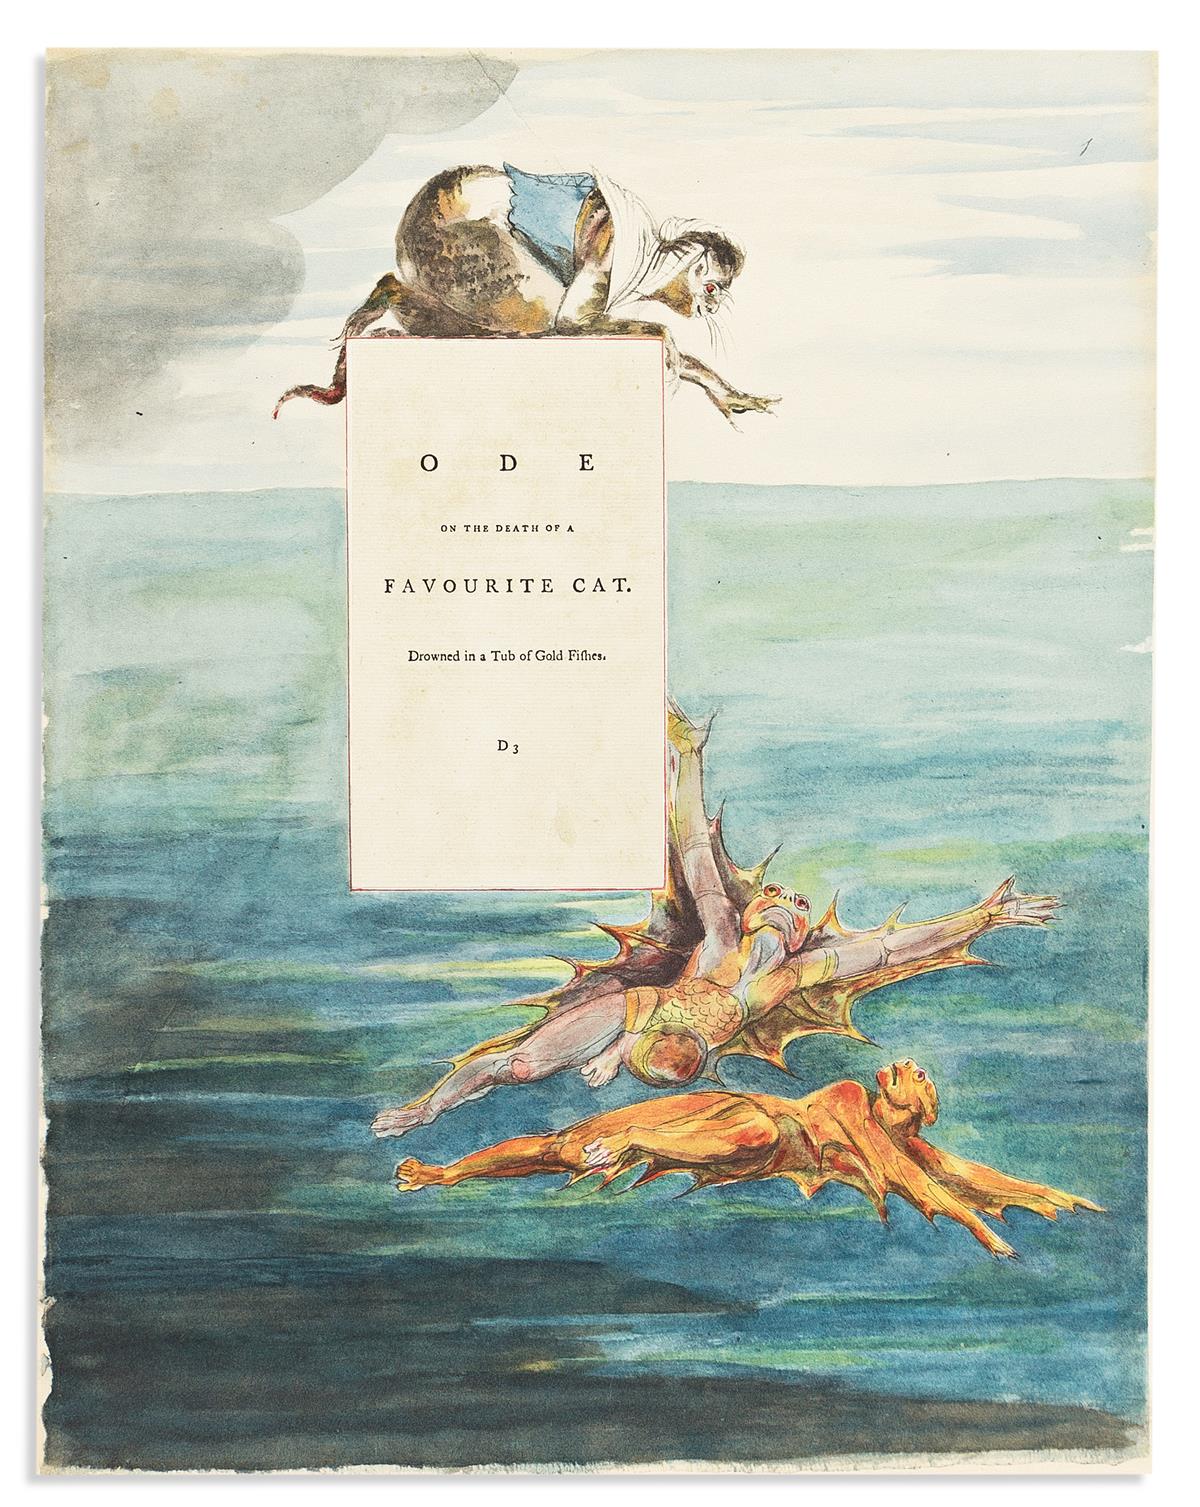 BLAKE, WILLIAM. William Blakes Water-Colour Designs for the Poems of Thomas Gray.